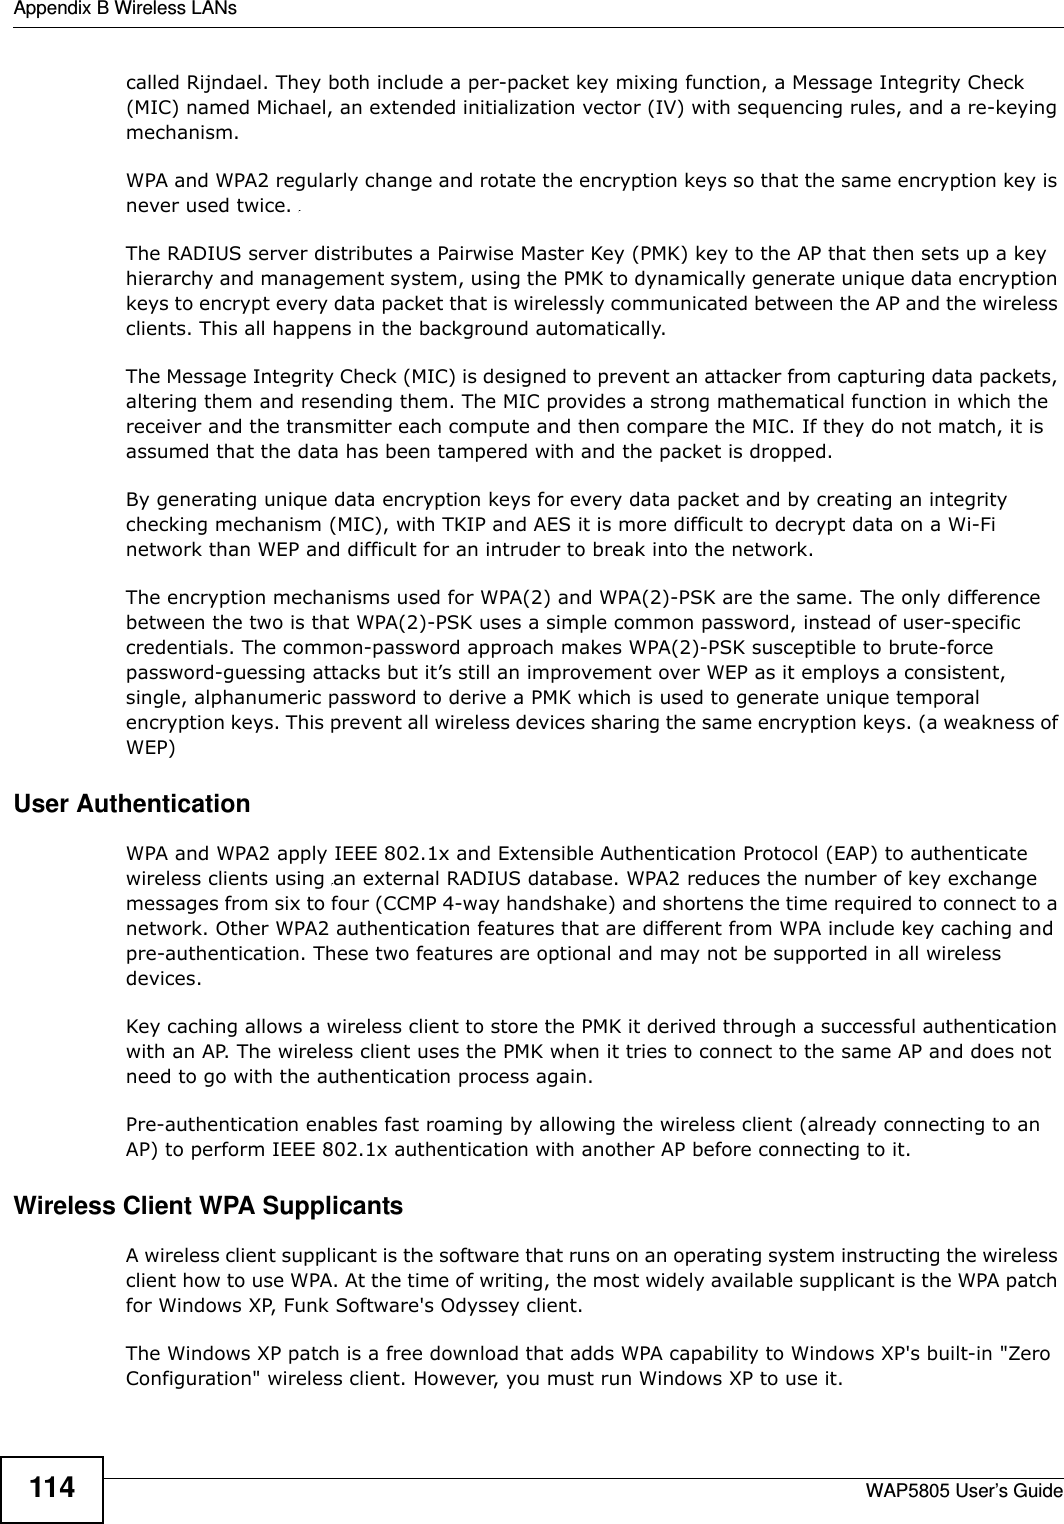 Appendix B Wireless LANsWAP5805 User’s Guide114called Rijndael. They both include a per-packet key mixing function, a Message Integrity Check (MIC) named Michael, an extended initialization vector (IV) with sequencing rules, and a re-keying mechanism.WPA and WPA2 regularly change and rotate the encryption keys so that the same encryption key is never used twice. The RADIUS server distributes a Pairwise Master Key (PMK) key to the AP that then sets up a key hierarchy and management system, using the PMK to dynamically generate unique data encryption keys to encrypt every data packet that is wirelessly communicated between the AP and the wireless clients. This all happens in the background automatically.The Message Integrity Check (MIC) is designed to prevent an attacker from capturing data packets, altering them and resending them. The MIC provides a strong mathematical function in which the receiver and the transmitter each compute and then compare the MIC. If they do not match, it is assumed that the data has been tampered with and the packet is dropped. By generating unique data encryption keys for every data packet and by creating an integrity checking mechanism (MIC), with TKIP and AES it is more difficult to decrypt data on a Wi-Fi network than WEP and difficult for an intruder to break into the network. The encryption mechanisms used for WPA(2) and WPA(2)-PSK are the same. The only difference between the two is that WPA(2)-PSK uses a simple common password, instead of user-specific credentials. The common-password approach makes WPA(2)-PSK susceptible to brute-force password-guessing attacks but it’s still an improvement over WEP as it employs a consistent, single, alphanumeric password to derive a PMK which is used to generate unique temporal encryption keys. This prevent all wireless devices sharing the same encryption keys. (a weakness of WEP)User Authentication WPA and WPA2 apply IEEE 802.1x and Extensible Authentication Protocol (EAP) to authenticate wireless clients using an external RADIUS database. WPA2 reduces the number of key exchange messages from six to four (CCMP 4-way handshake) and shortens the time required to connect to a network. Other WPA2 authentication features that are different from WPA include key caching and pre-authentication. These two features are optional and may not be supported in all wireless devices.Key caching allows a wireless client to store the PMK it derived through a successful authentication with an AP. The wireless client uses the PMK when it tries to connect to the same AP and does not need to go with the authentication process again.Pre-authentication enables fast roaming by allowing the wireless client (already connecting to an AP) to perform IEEE 802.1x authentication with another AP before connecting to it.Wireless Client WPA SupplicantsA wireless client supplicant is the software that runs on an operating system instructing the wireless client how to use WPA. At the time of writing, the most widely available supplicant is the WPA patch for Windows XP, Funk Software&apos;s Odyssey client. The Windows XP patch is a free download that adds WPA capability to Windows XP&apos;s built-in &quot;Zero Configuration&quot; wireless client. However, you must run Windows XP to use it. 